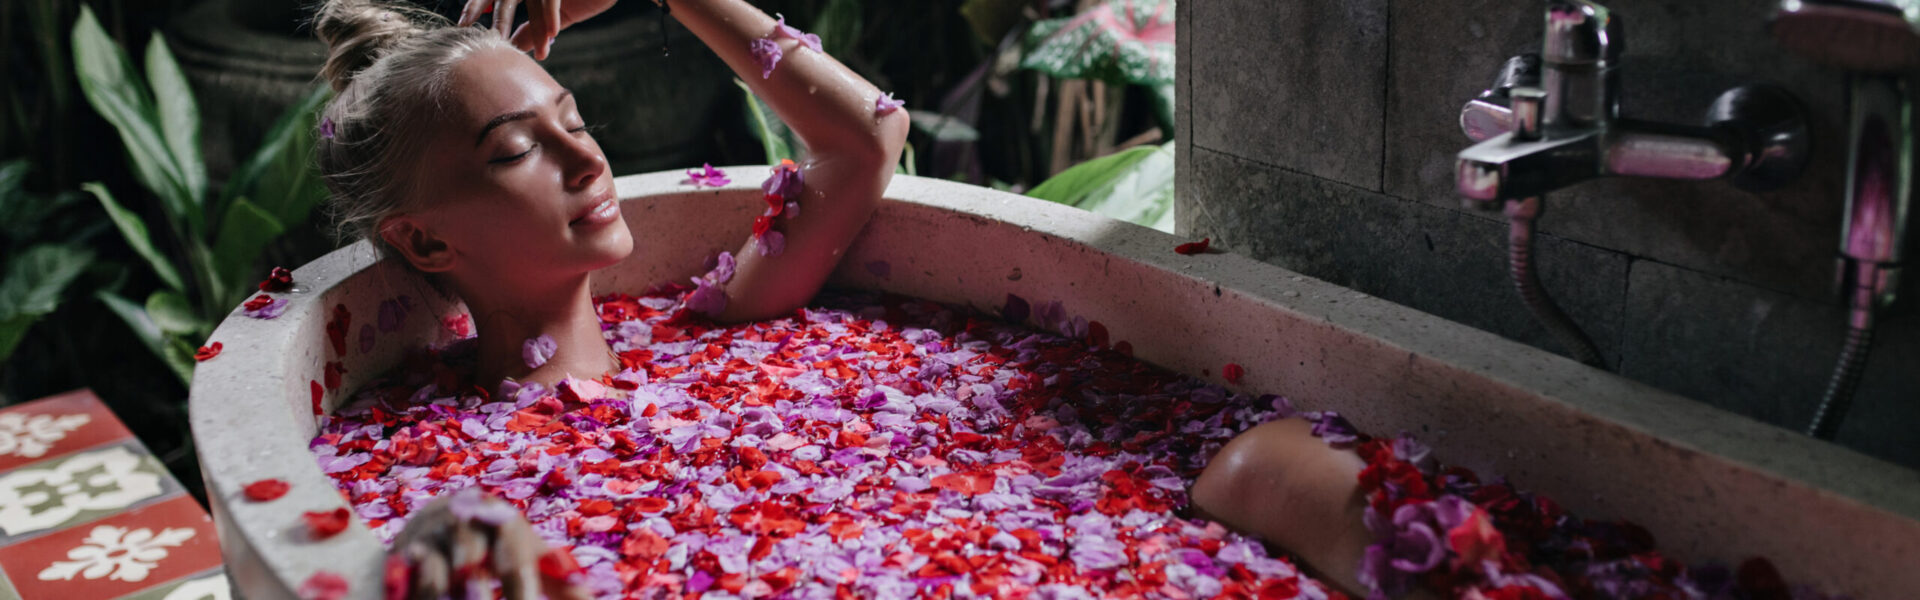 Pleasant woman with tanned skin lying in bath with eyes closed. Indoor shot of cute blonde lady enjoying spa with rose petals.